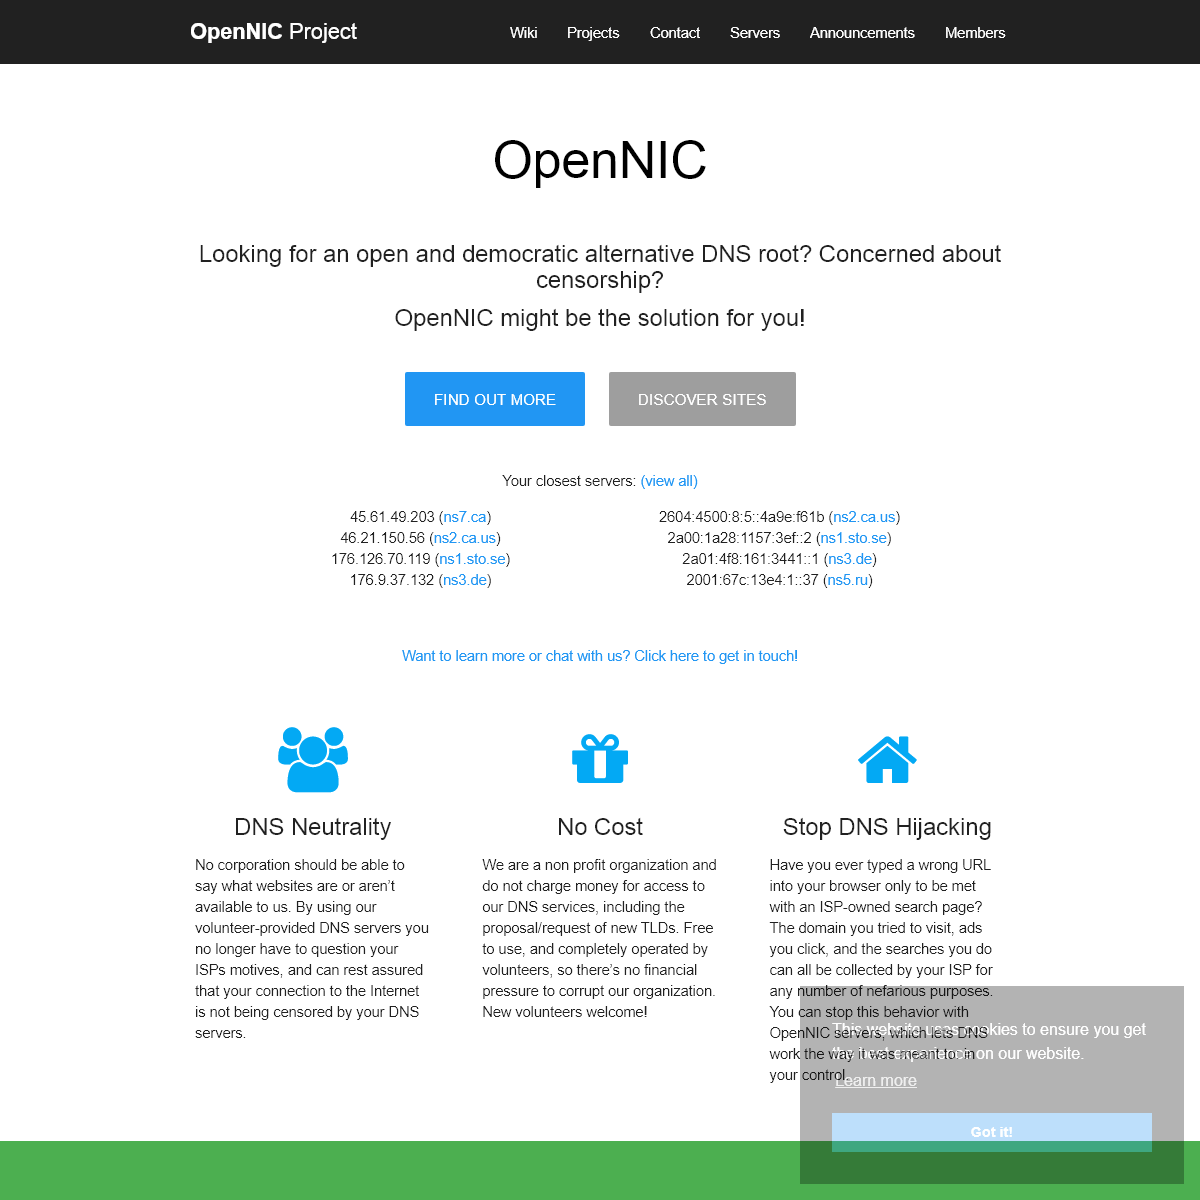 A complete backup of opennic.org